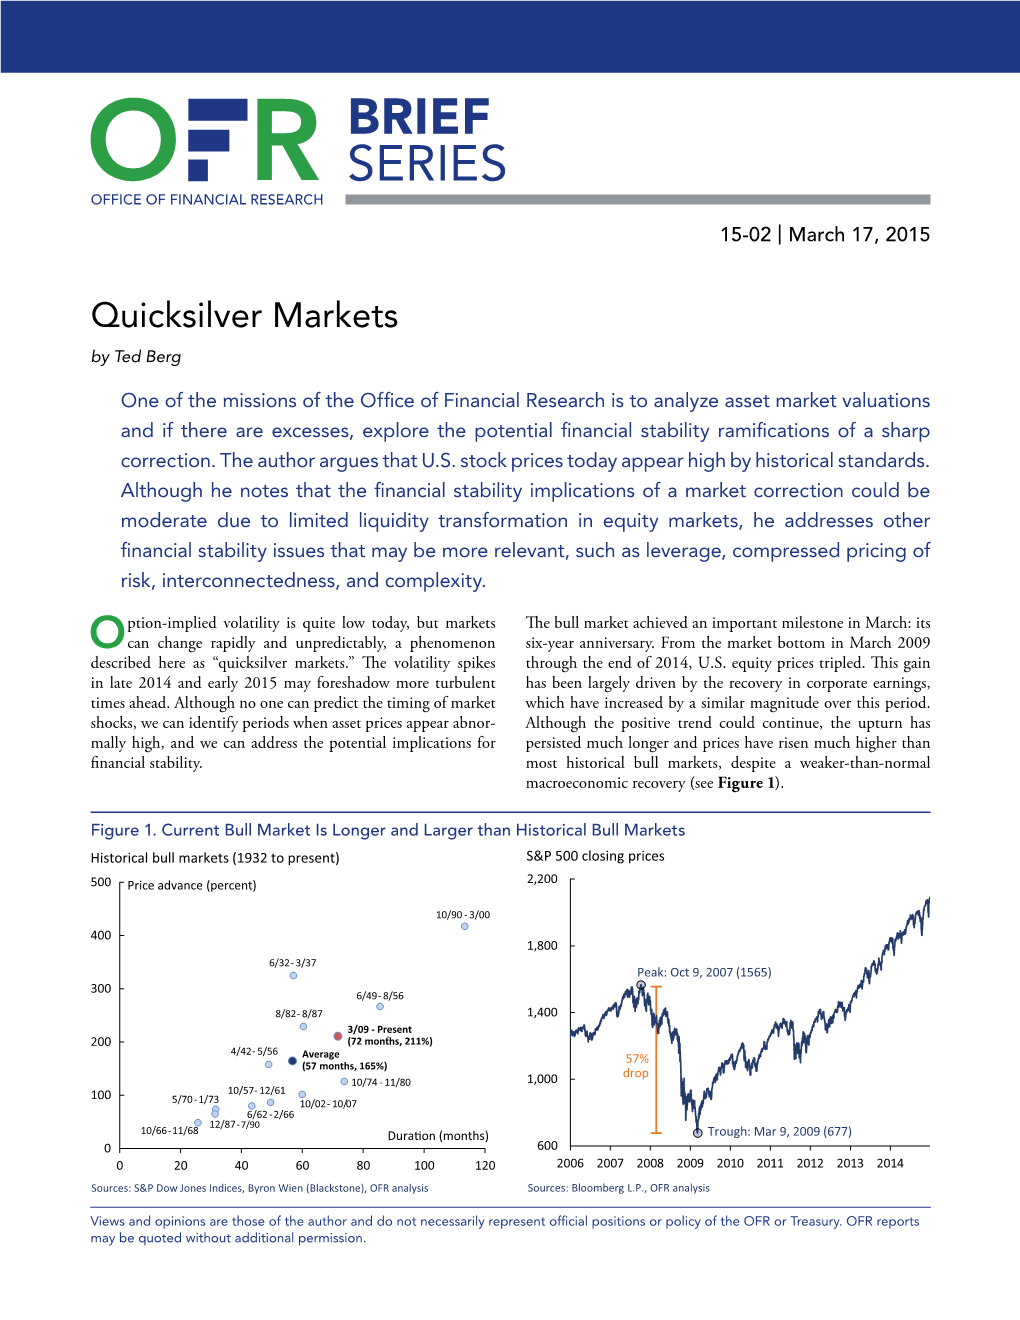 Quicksilver Markets by Ted Berg